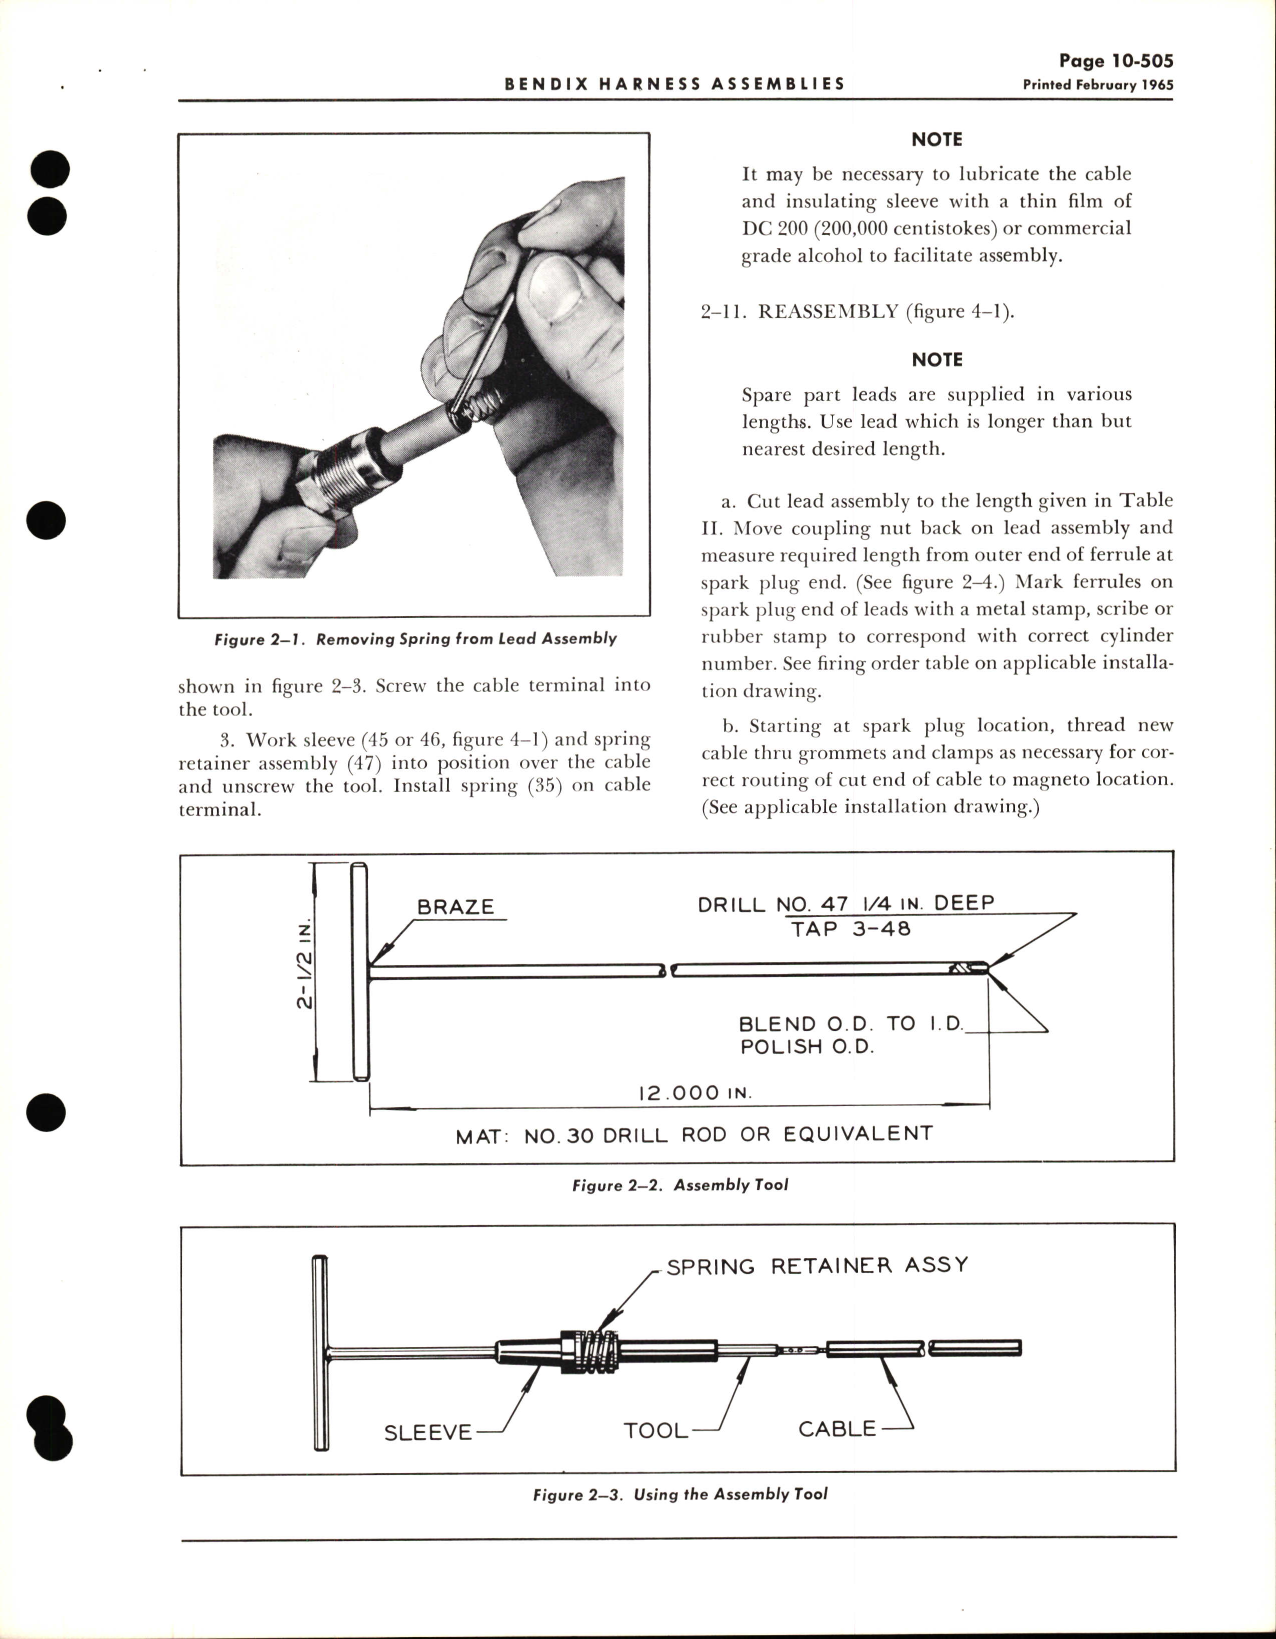 Sample page 5 from AirCorps Library document: Overhaul Instructions with Parts List for S-20 and S-200 Magneto Harness Assemblies